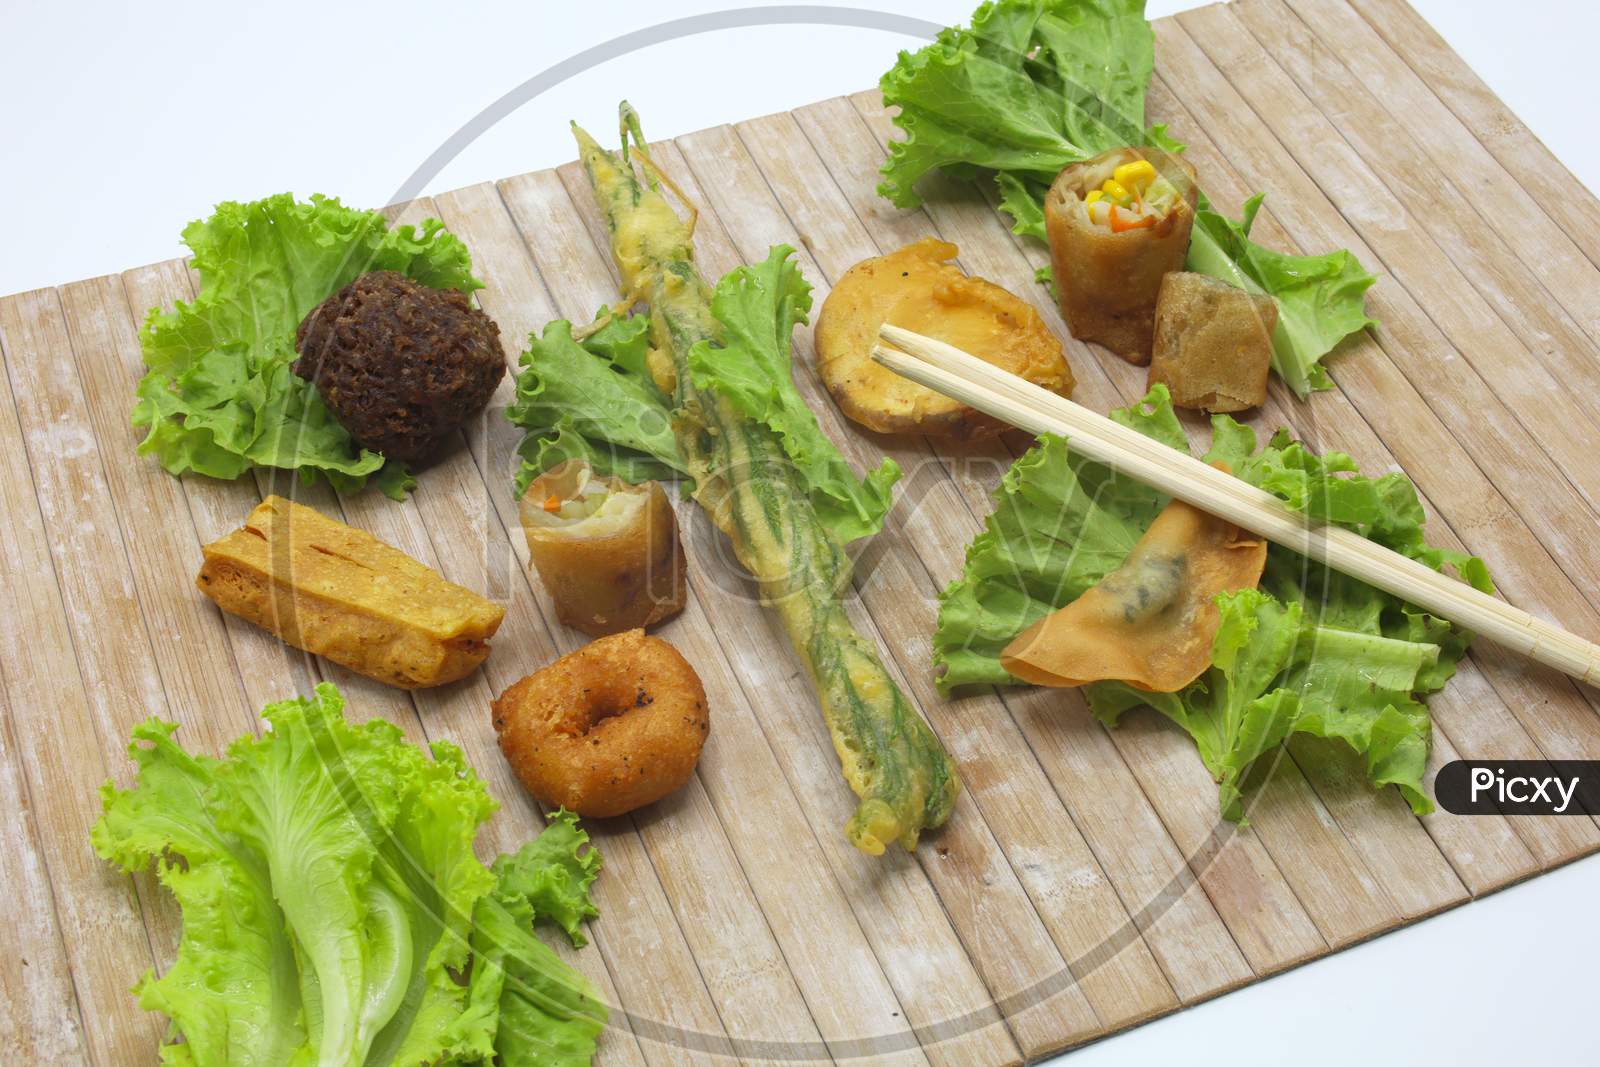 Burmese Dish served on a Wooden Board